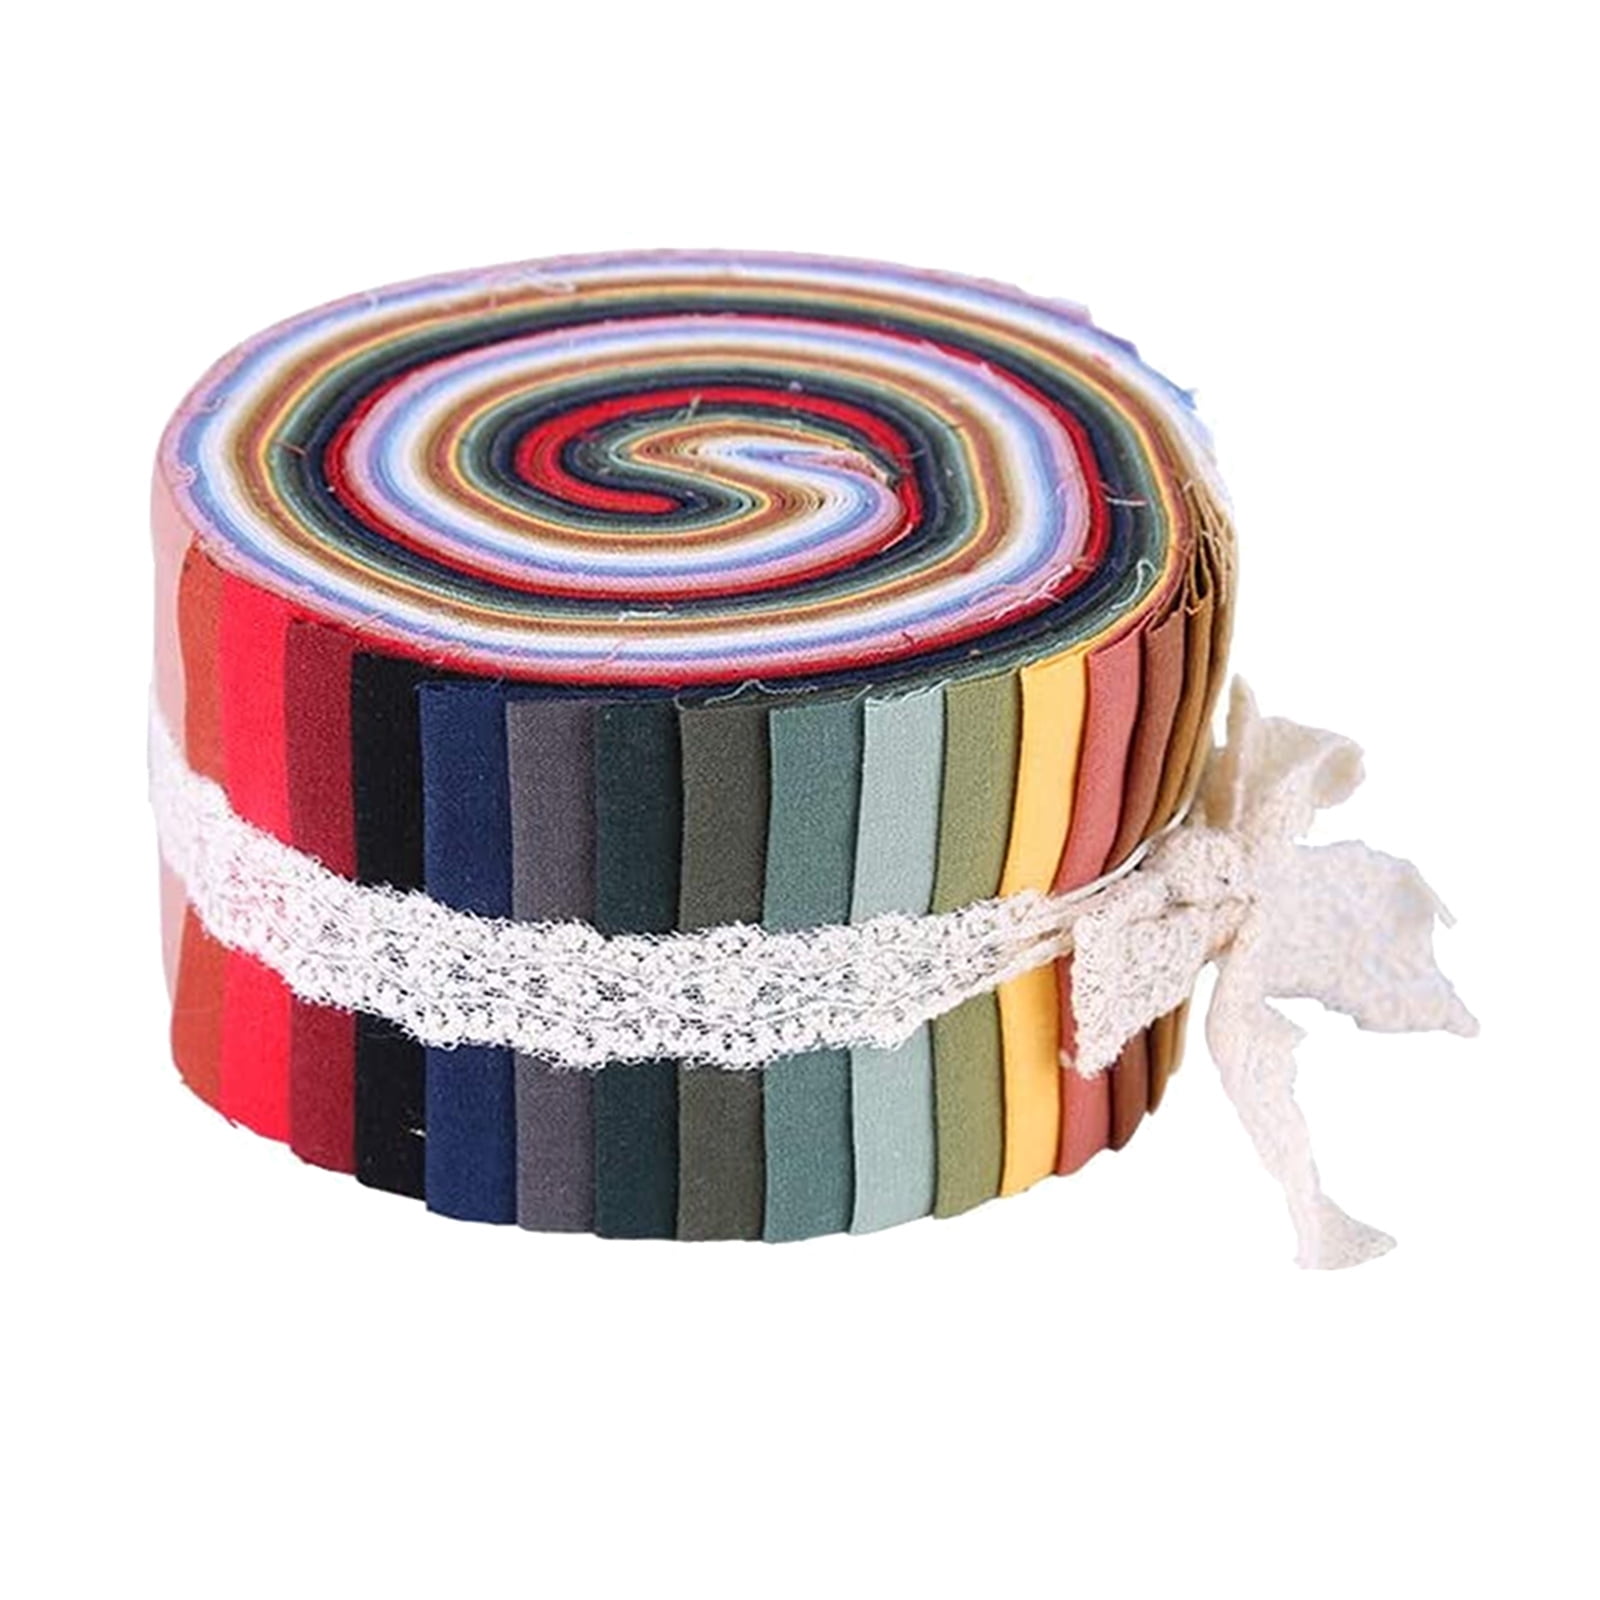 Jnenery Jelly Roll Fabric Strips for Quilting, Jelly Rolls for Quilting, 36  Strip Assorted Bundle, Soft Cotton Quilting Fabric for for Blanket